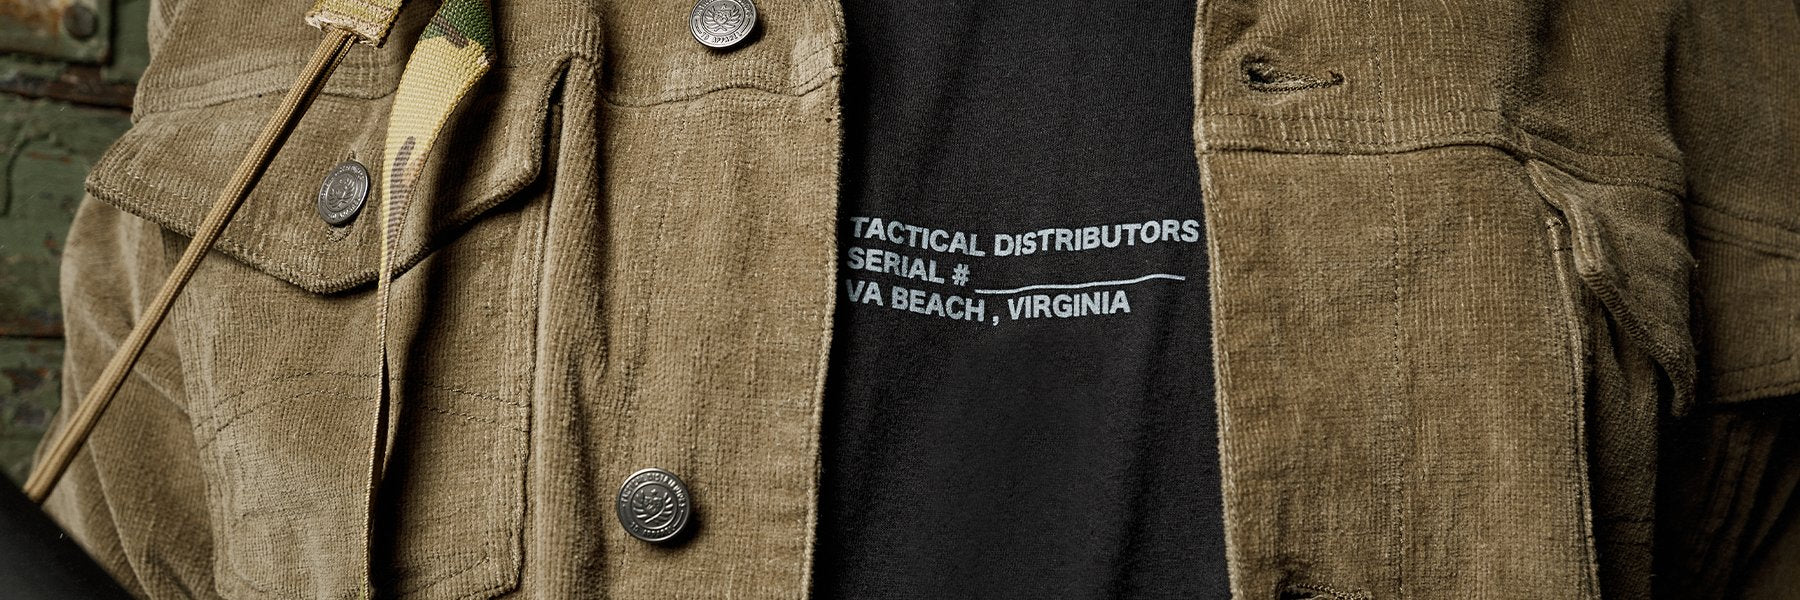 Tactical Clothing